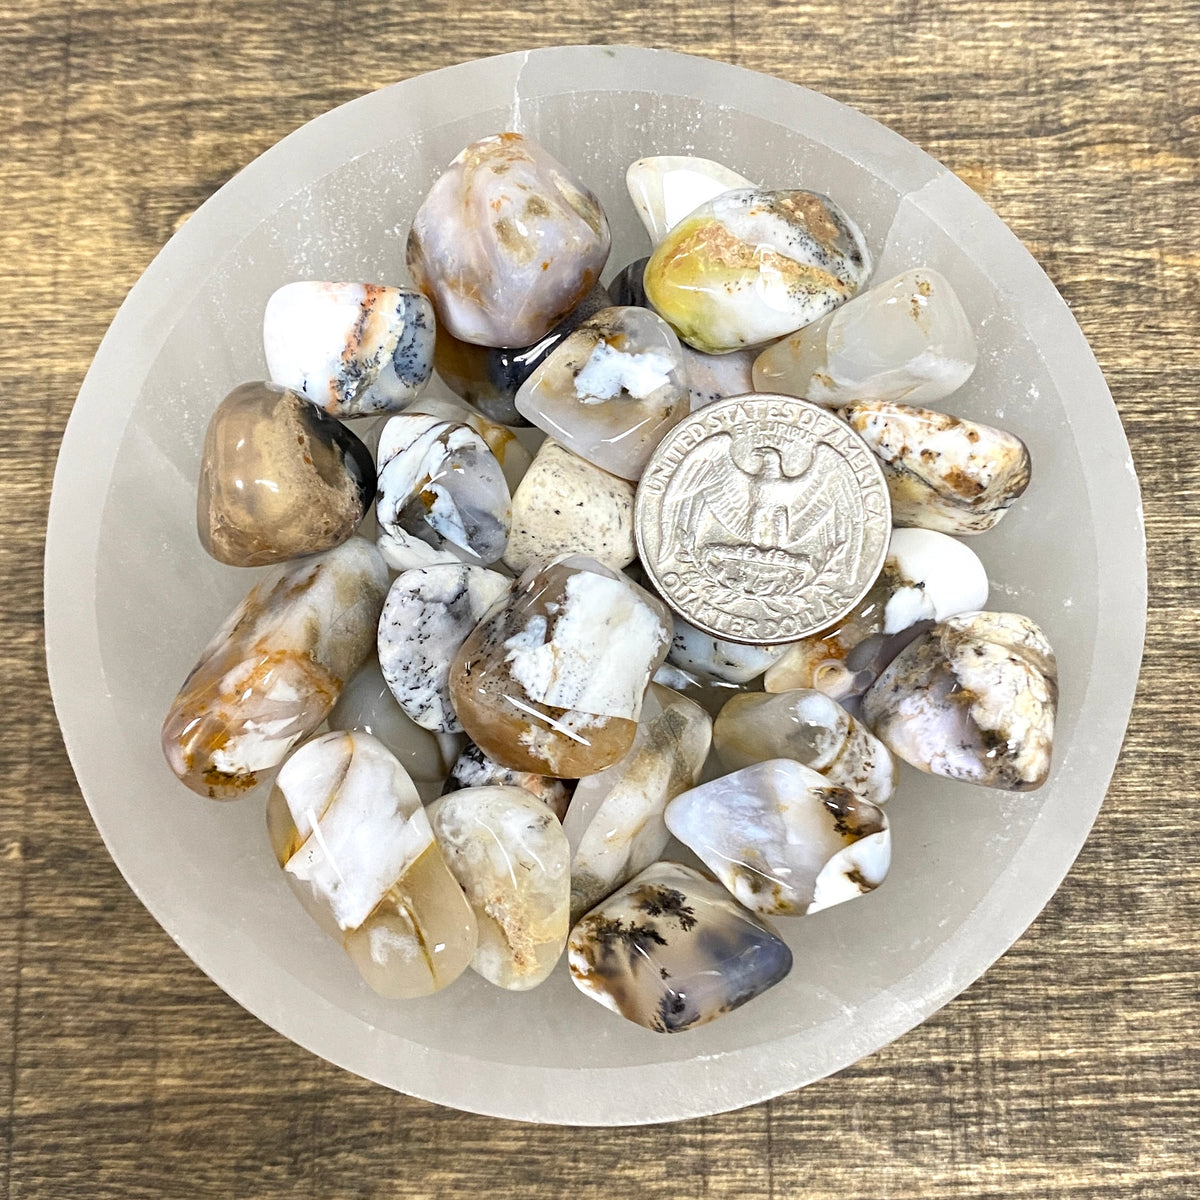 Overhead comparison shot of a US quarter coin and various Dendritic Agate tumbled stones in a small bowl.